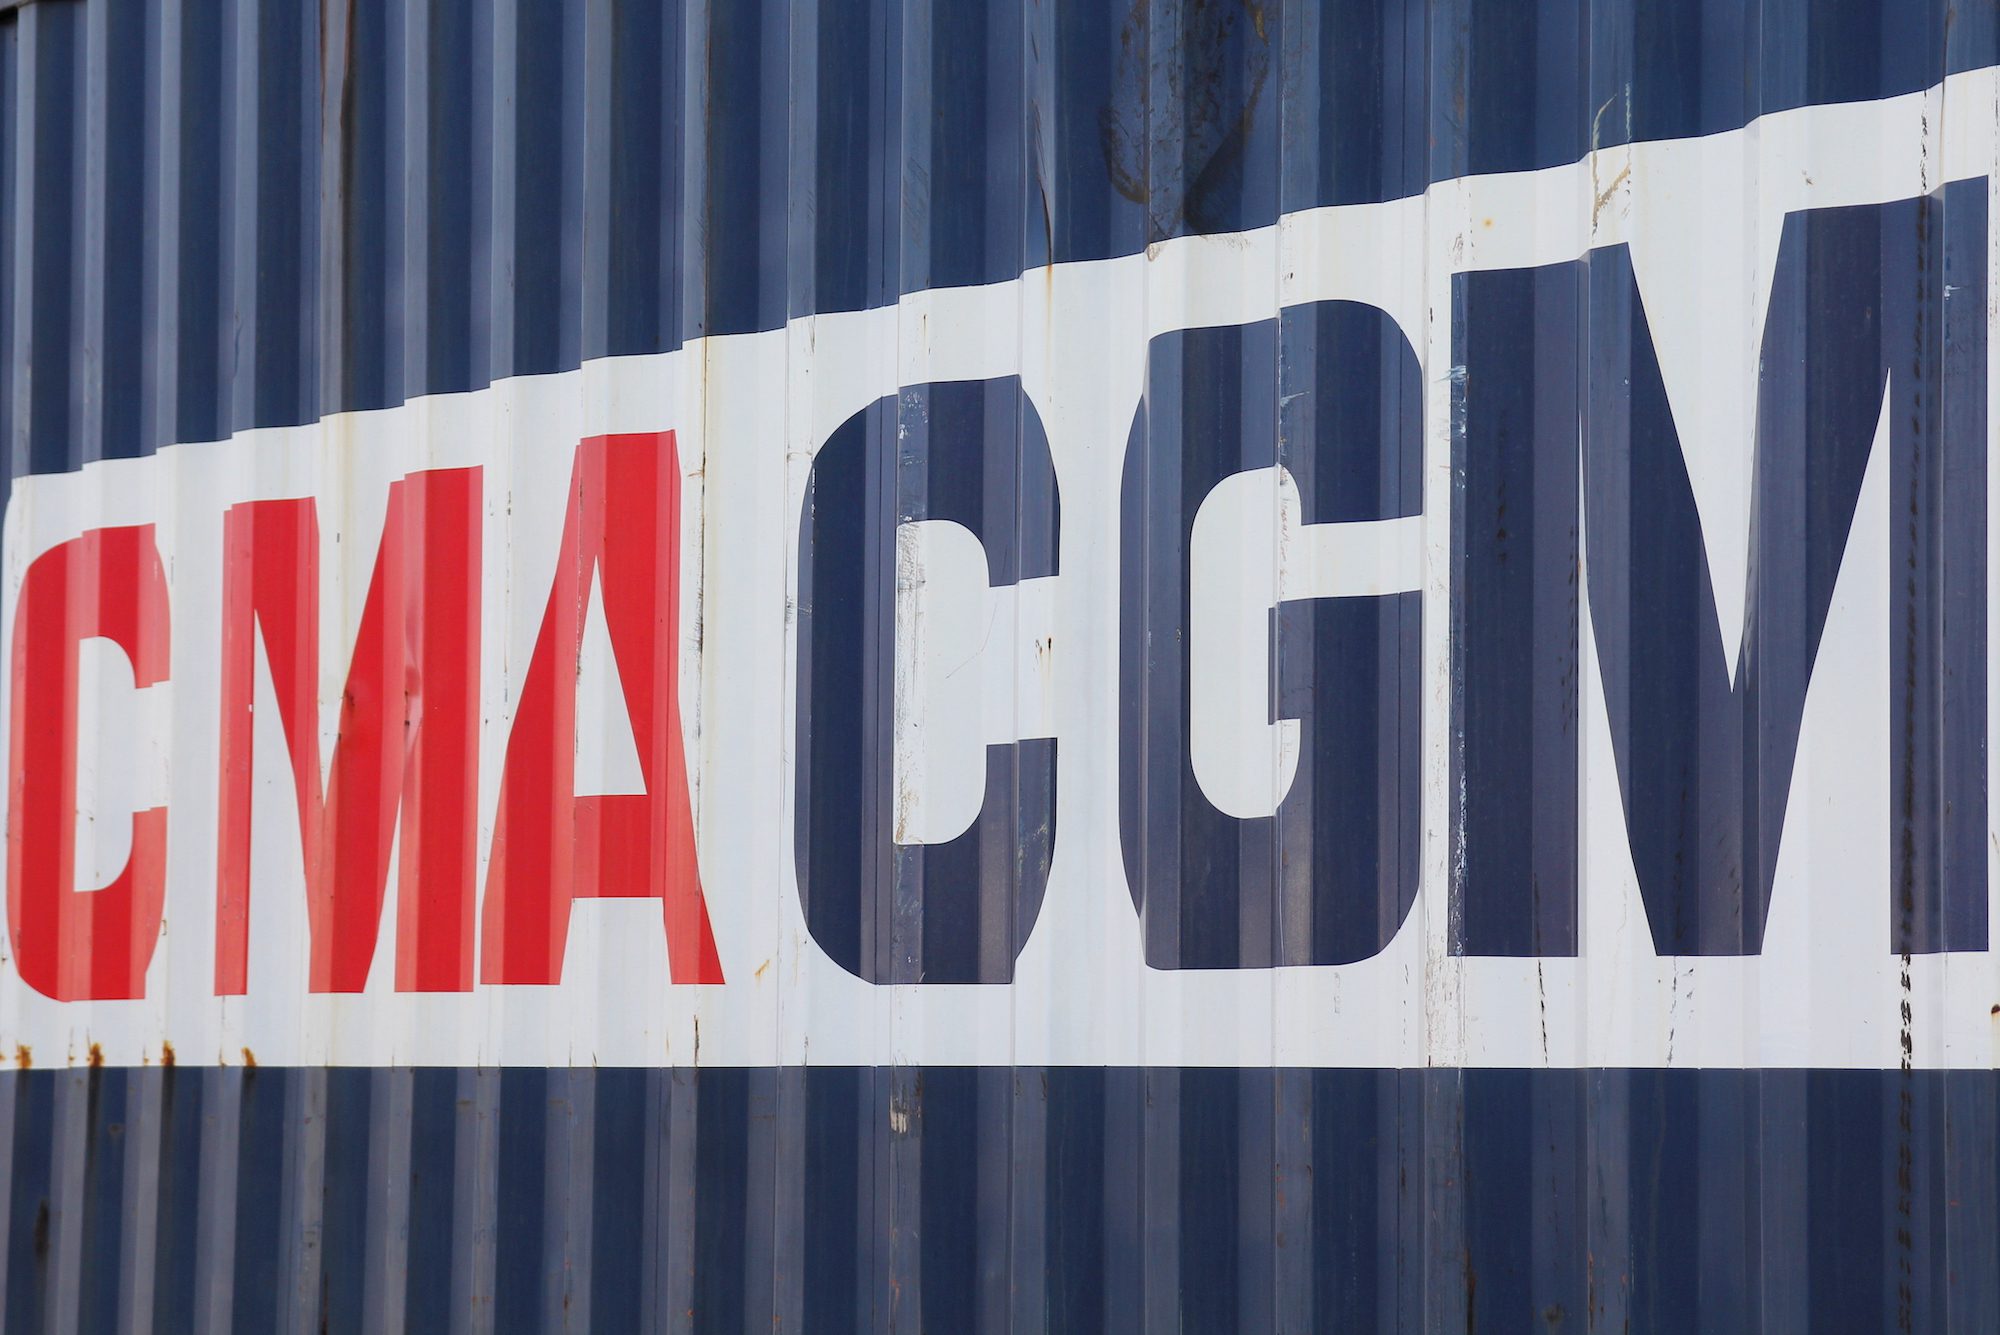 cma cgm logo on a shipping container